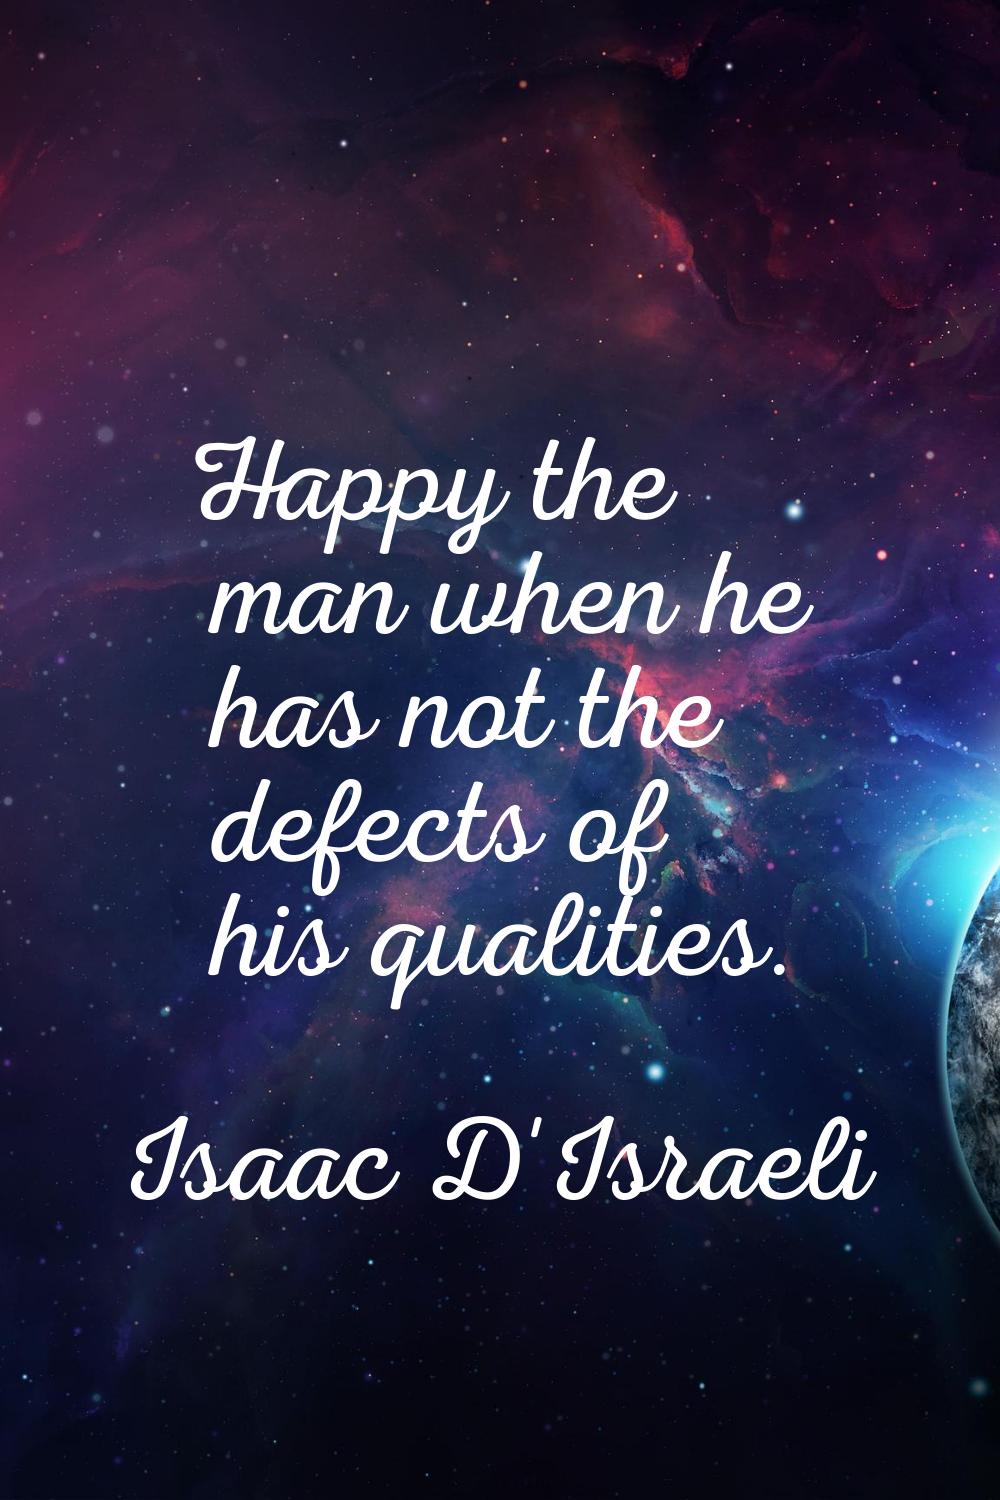 Happy the man when he has not the defects of his qualities.